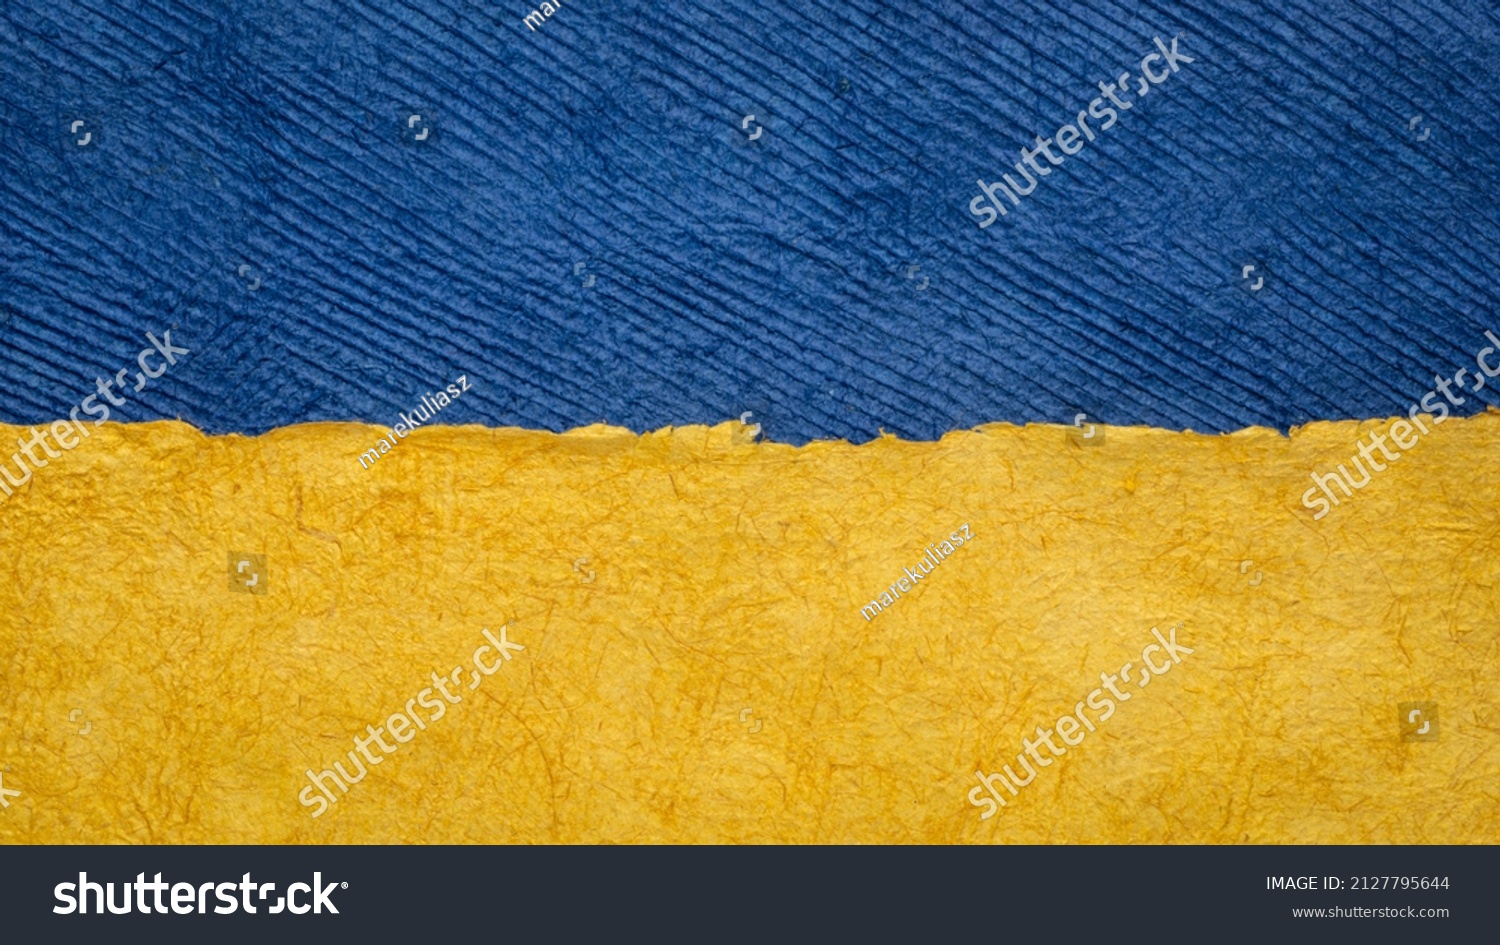 paper abstract in colors of Ukrainian national flag - blue and yellow, set of textured, handmade, bark paper sheets #2127795644